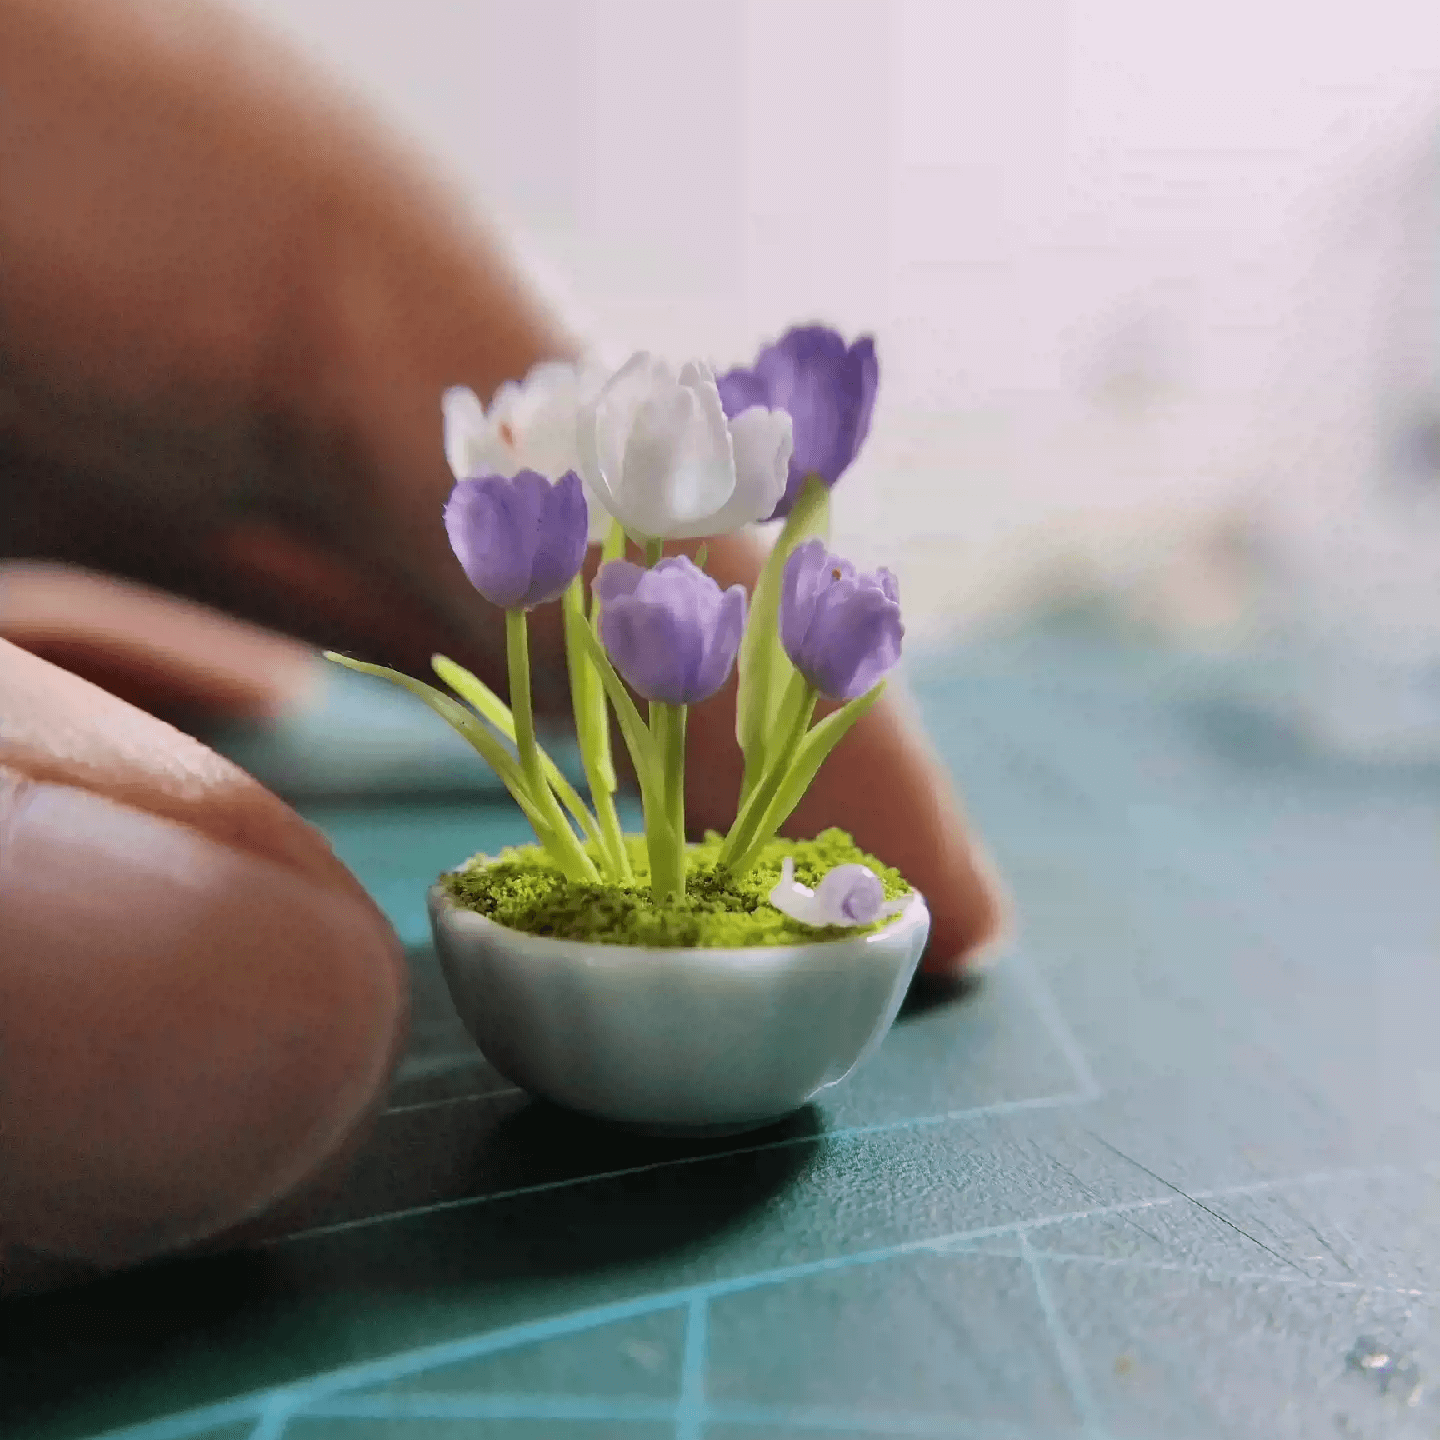 Tulips are erect flowers with long, broad, parallel-veined leaves and a cup-shaped, single or double flower at the tip of the stem.  Material: Handmade from Clay